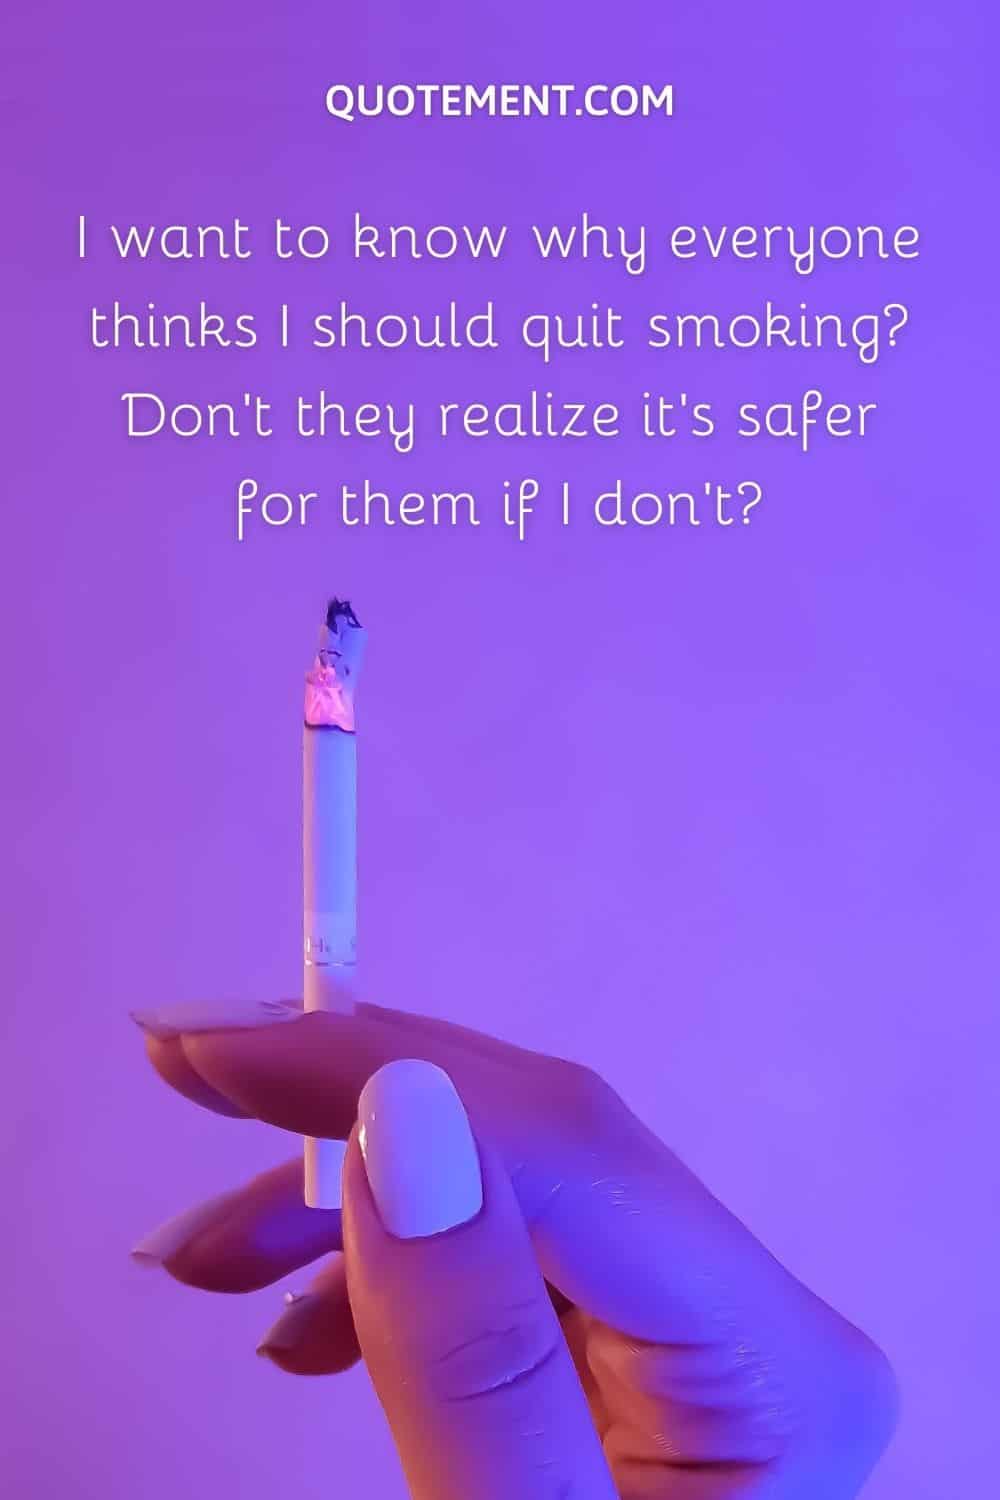 I want to know why everyone thinks I should quit smoking